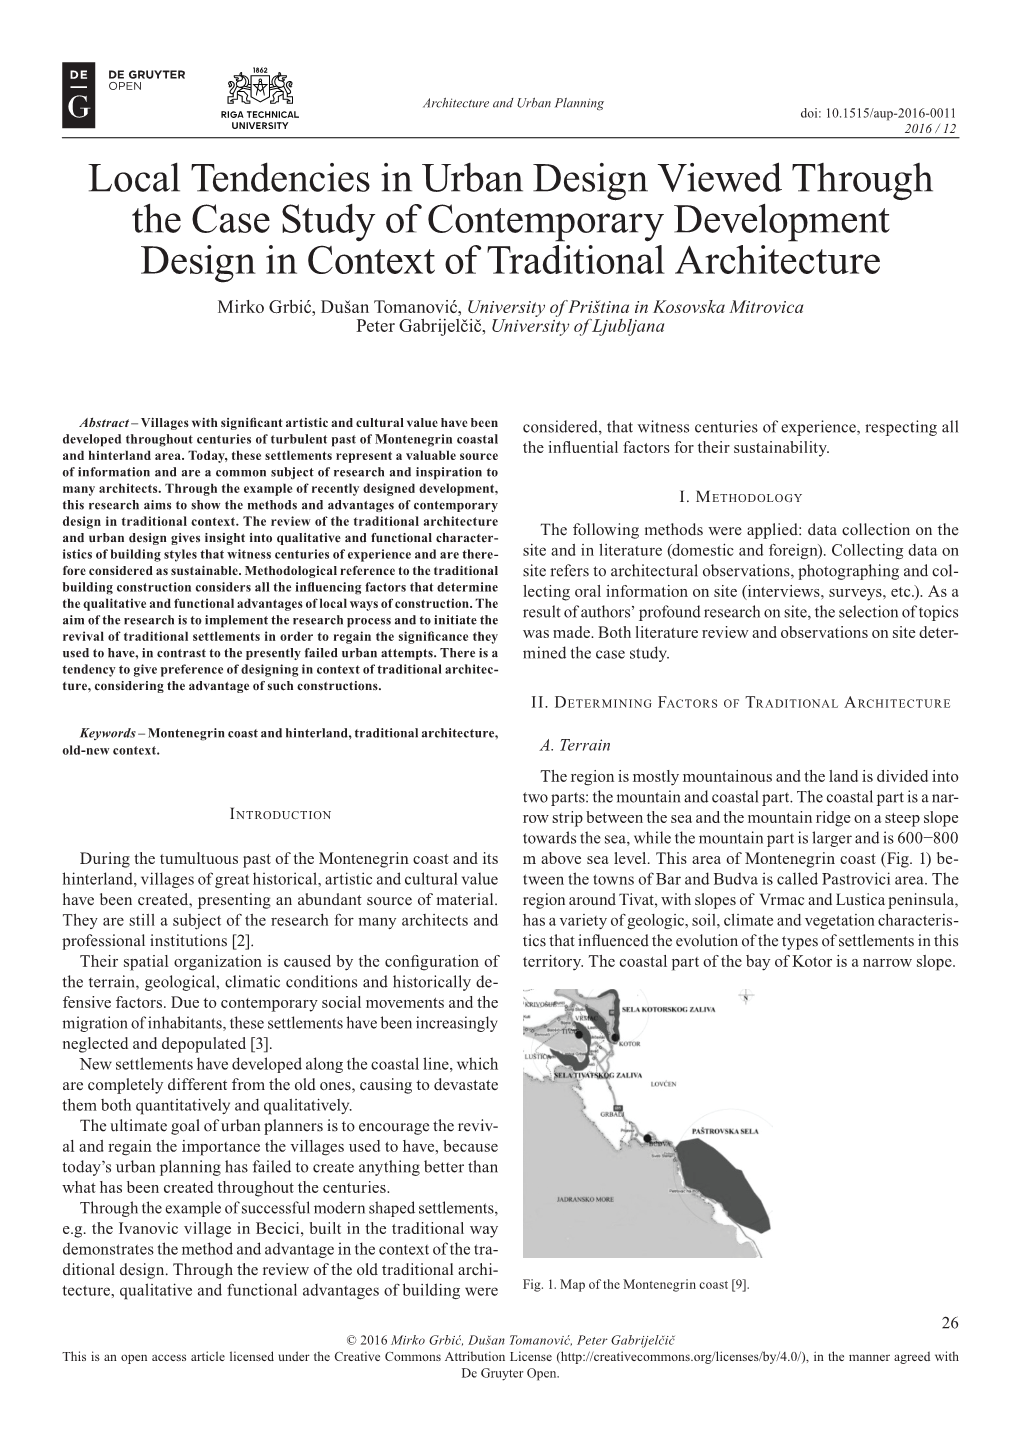 Local Tendencies in Urban Design Viewed Through the Case Study of Contemporary Development Design in Context of Traditional Arch